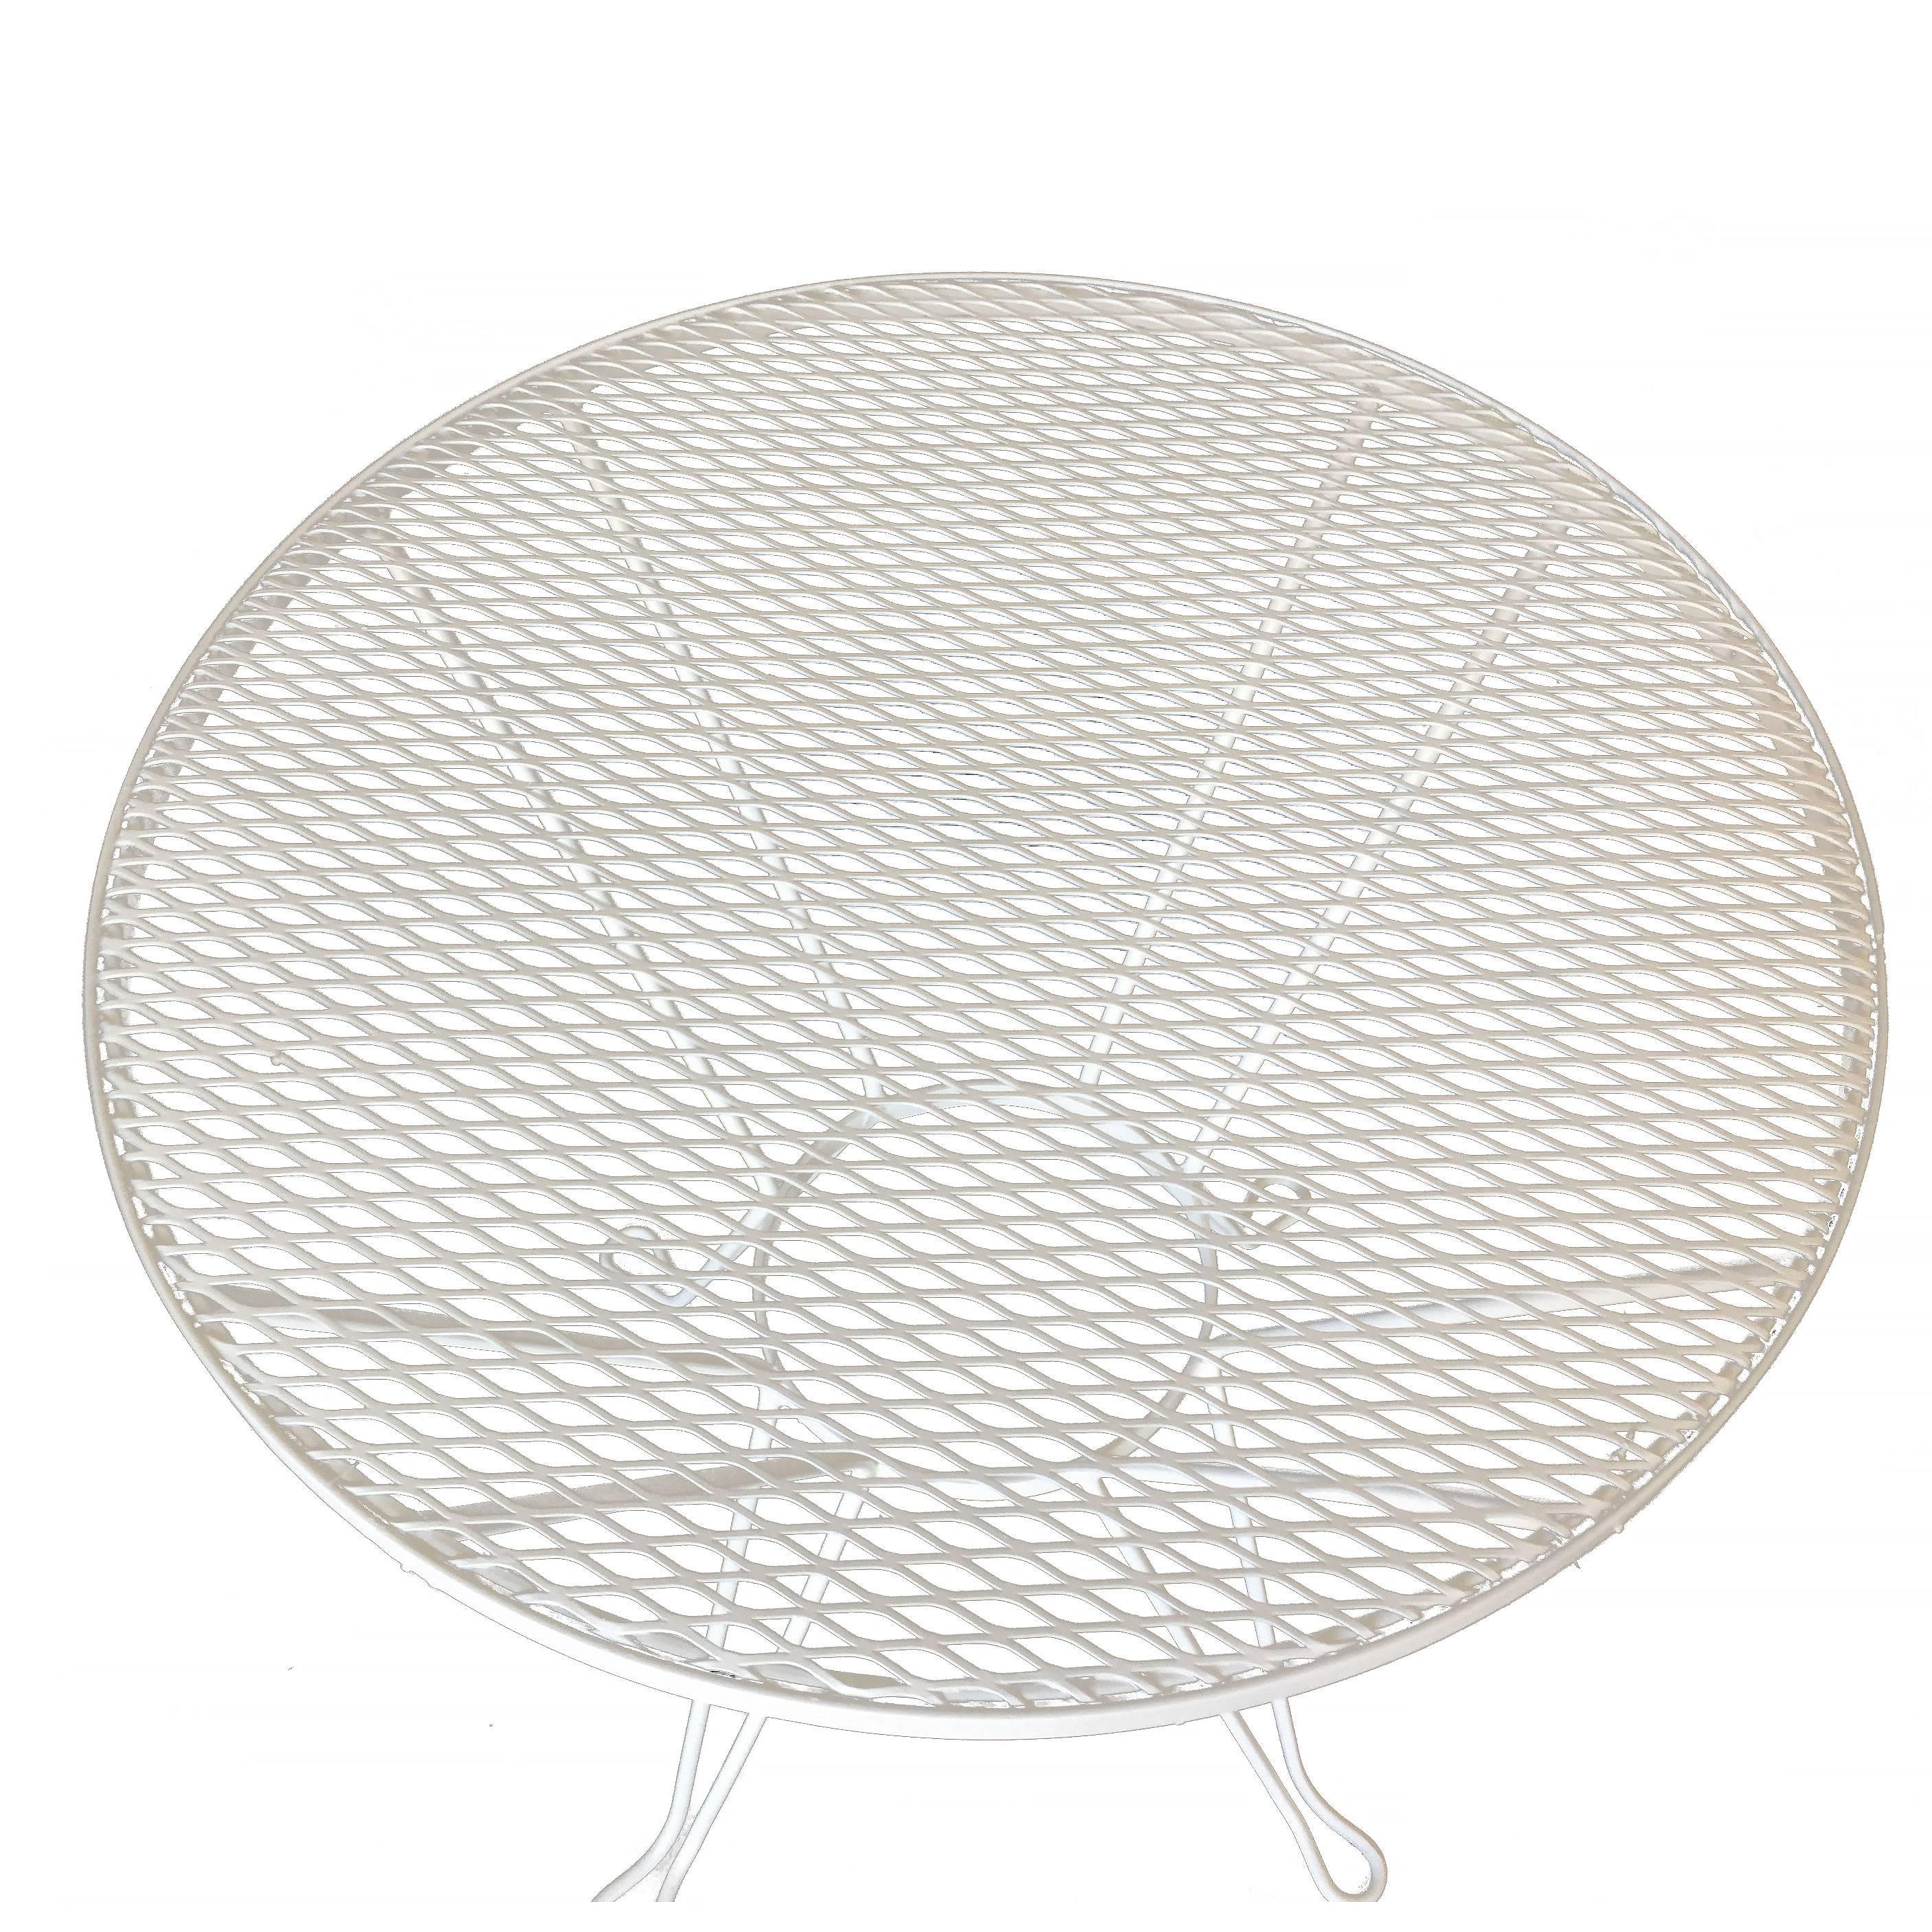 Vintage round outdoor/patio side table with iron scrolling base and steel mesh top by the Woodward company. The table can be repainted in your choice of color,

circa 1950, USA by Woodard.

Measurements: 1.